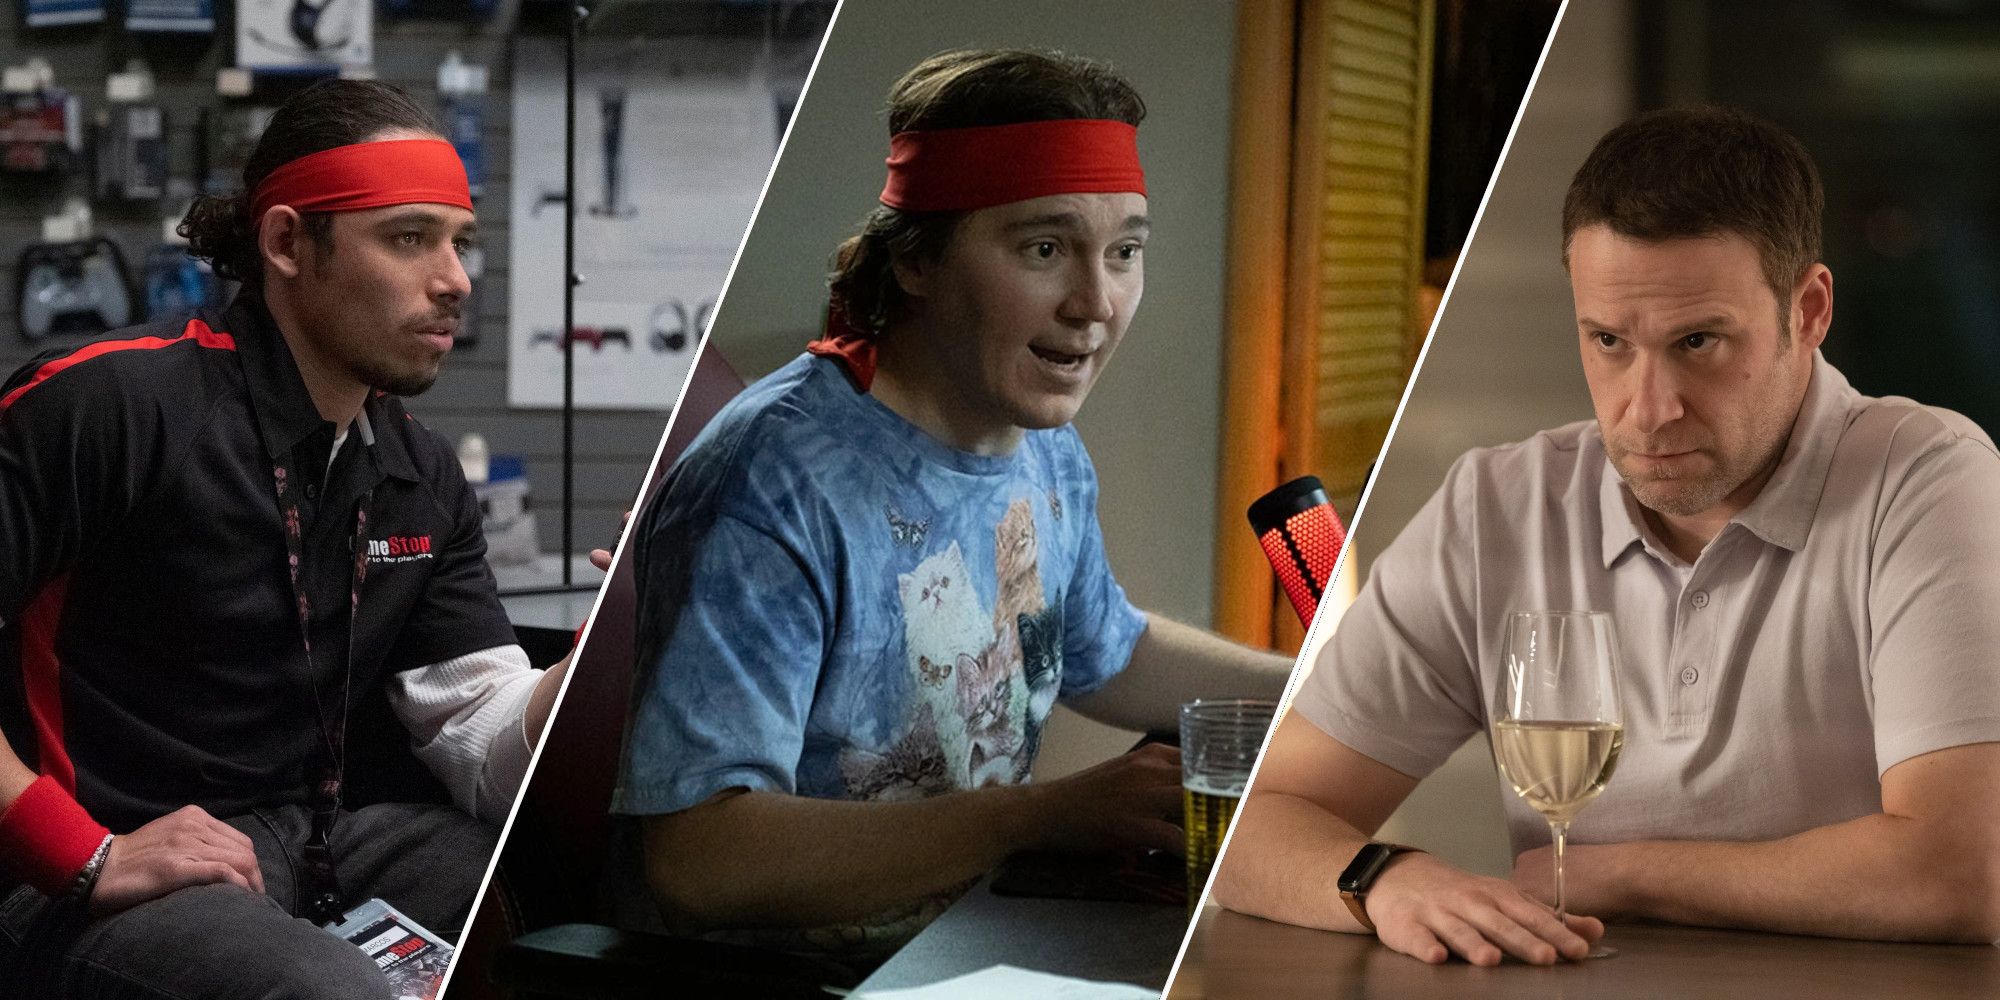 A collage of characters in the film Dumb Money, featuring characters portrayed by Anthony Ramos, Paul Dano, and Seth Rogen